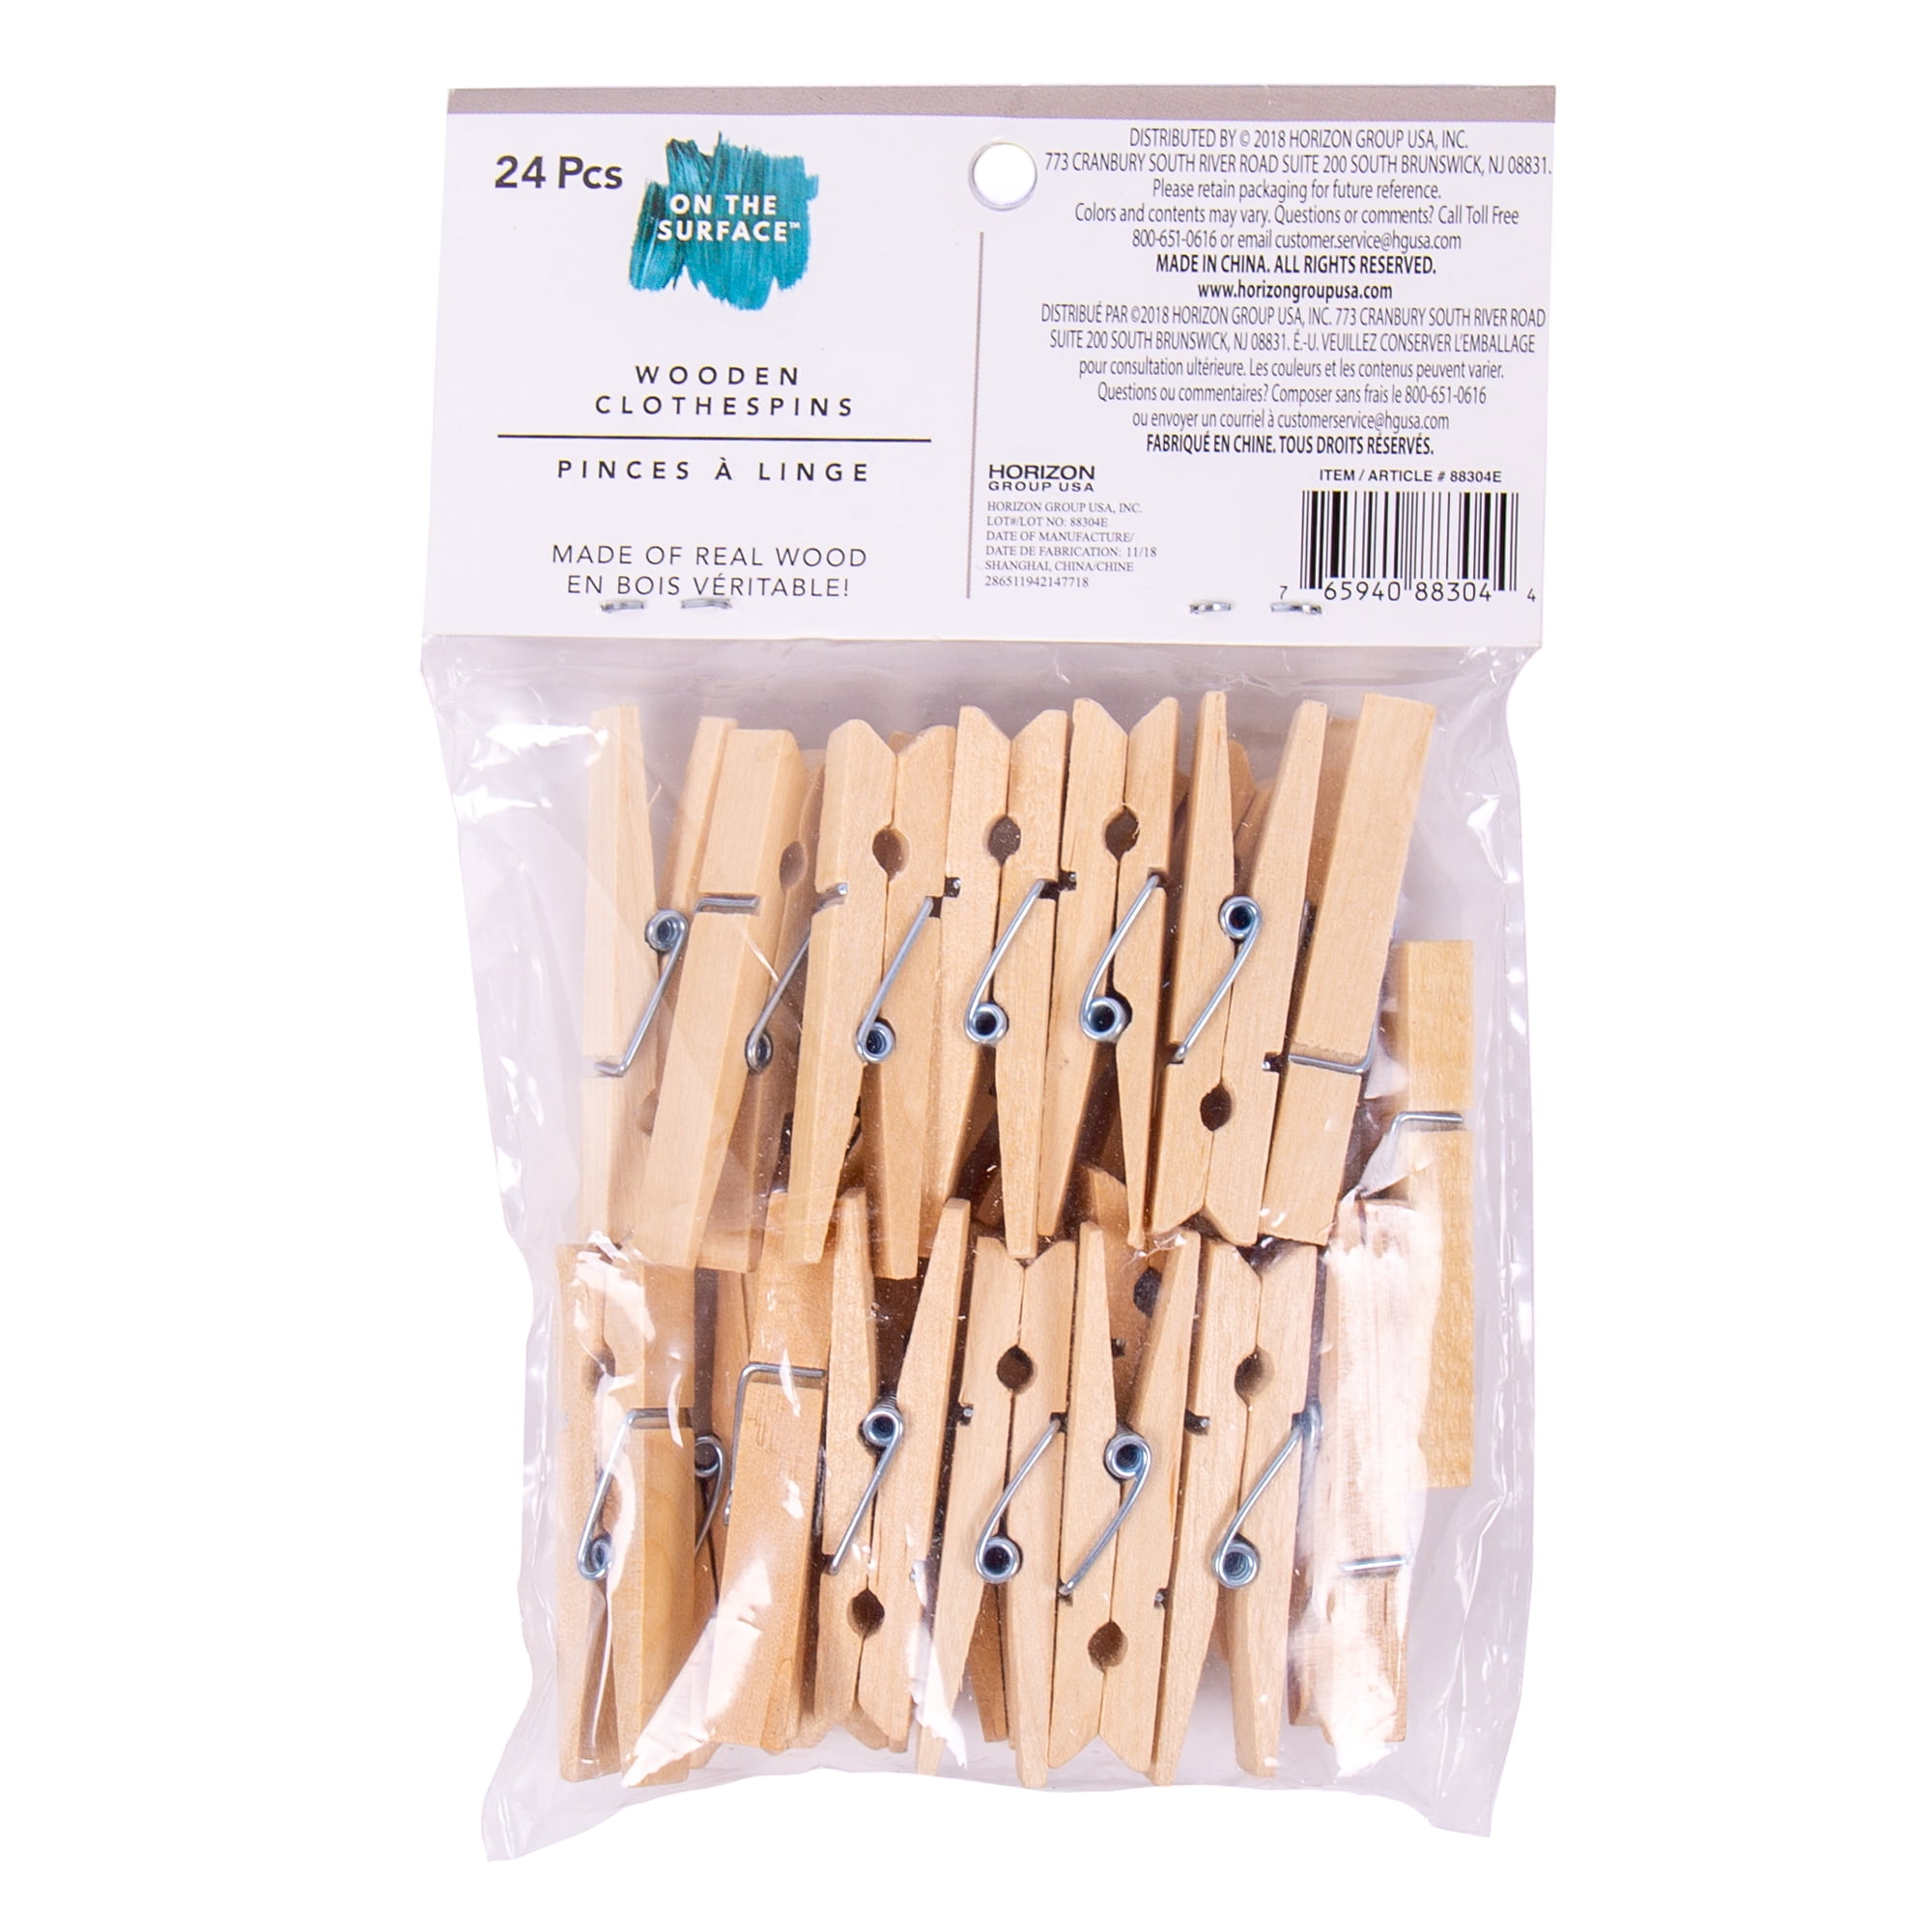 Small Mini Wooden Clothes Pins, Doll House Tiny Clothespins, Wood Rustic Mini  Clothespins, Tiny Wooden Clothespins, Sets of 20 Clothespins 